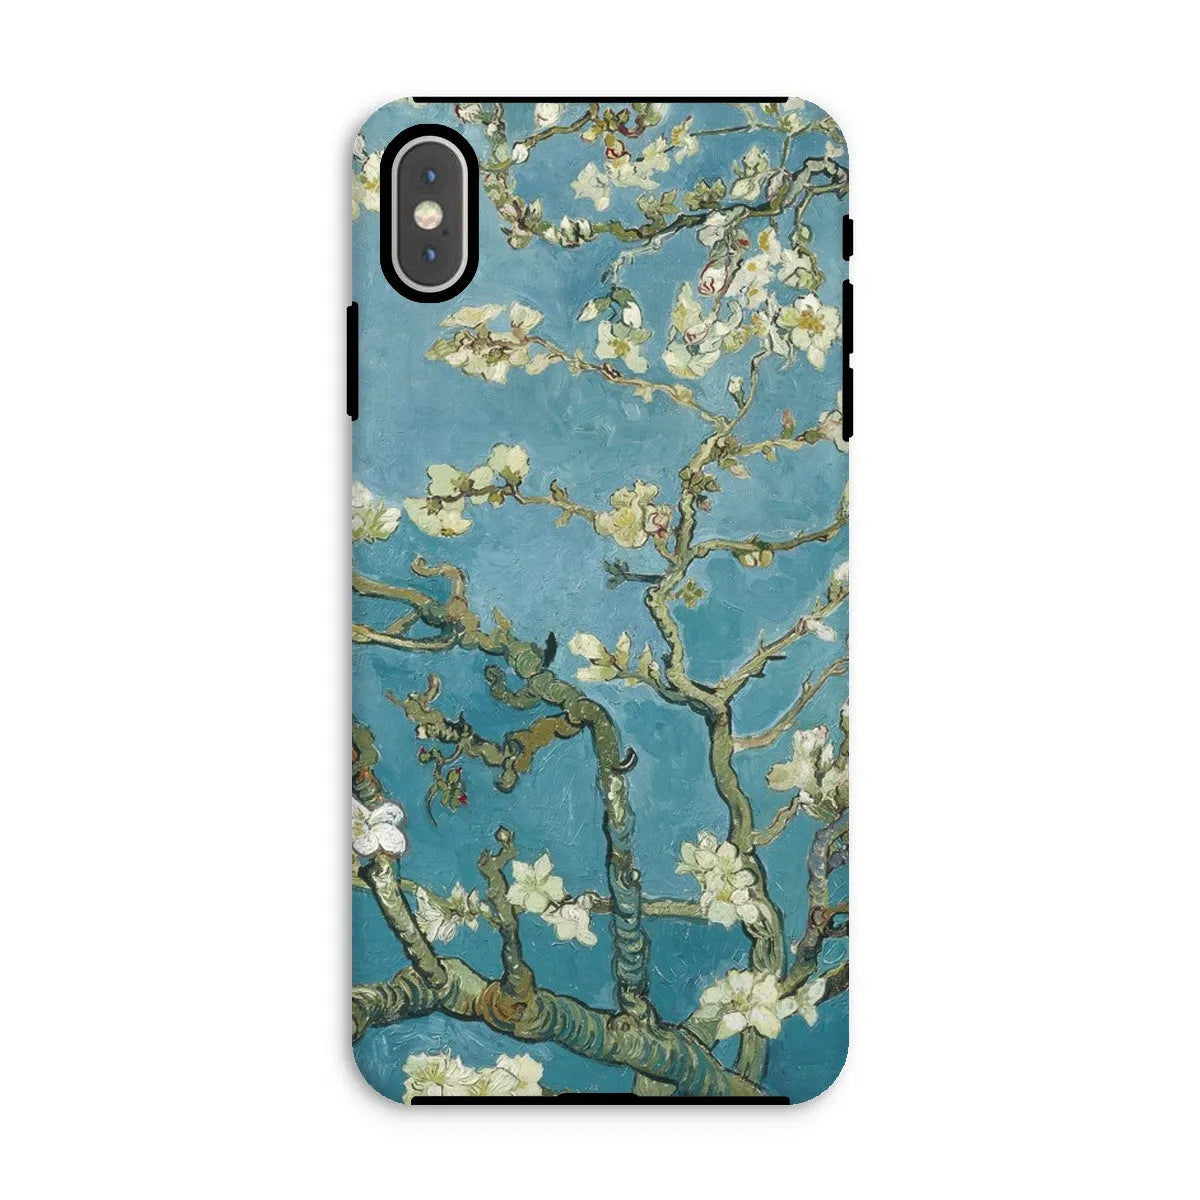 Almond Blossom - Vincent Van Gogh Aesthetic Phone Case - Iphone Xs Max / Matte - Mobile Phone Cases - Aesthetic Art